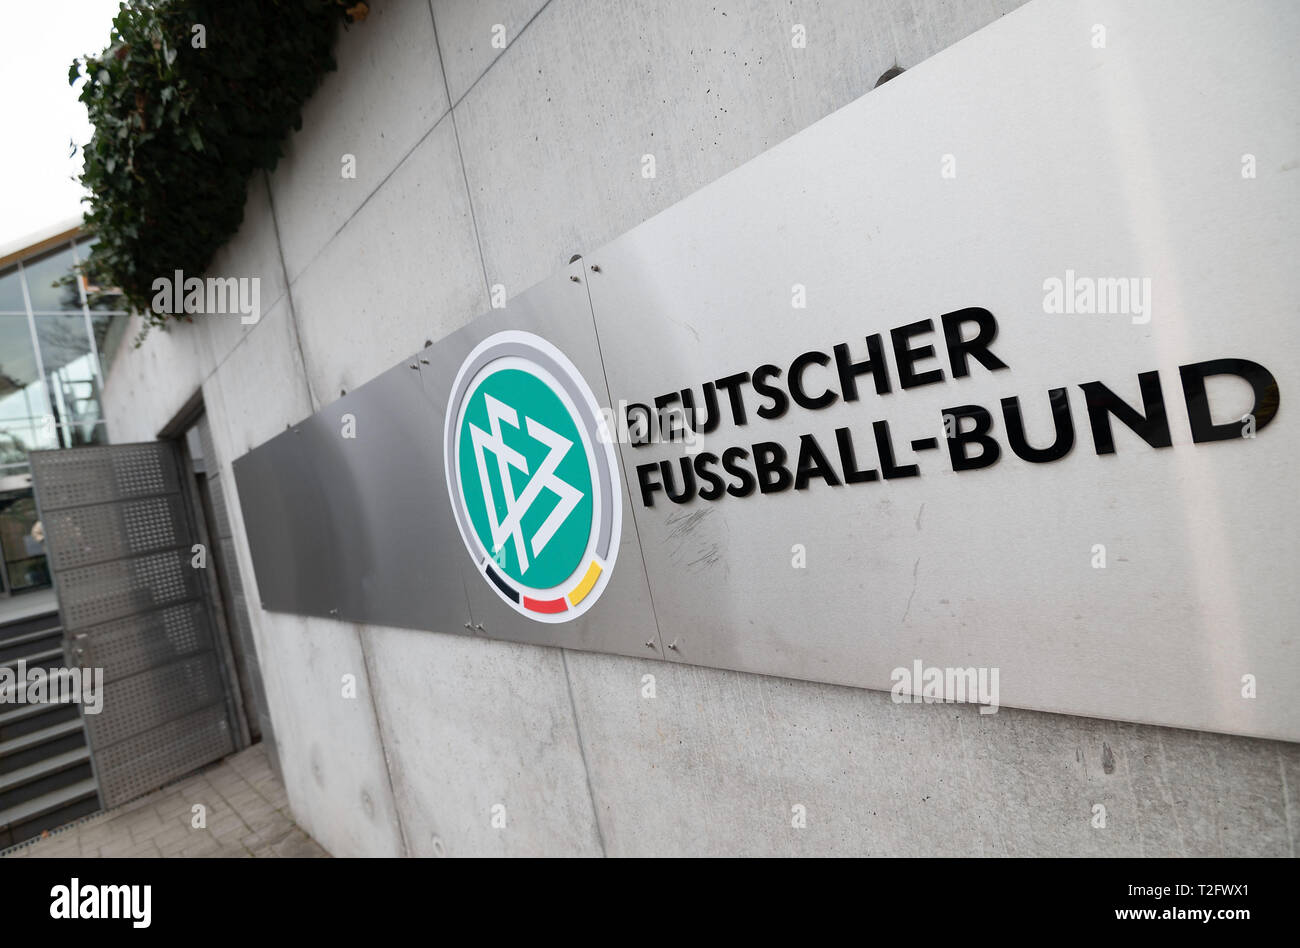 Frankfurt. 2nd Apr, 2019. Photo taken on April 2, 2019 shows an exterior view of the headquarters of the German Football Association (DFB) in Frankfurt, Germany. President of DFB Reinhard Grindel has resigned after allegations of undeclared earnings, the DFB have confirmed in an official statement on Tuesday. Credit: Florian Ulrich/Xinhua/Alamy Live News Stock Photo